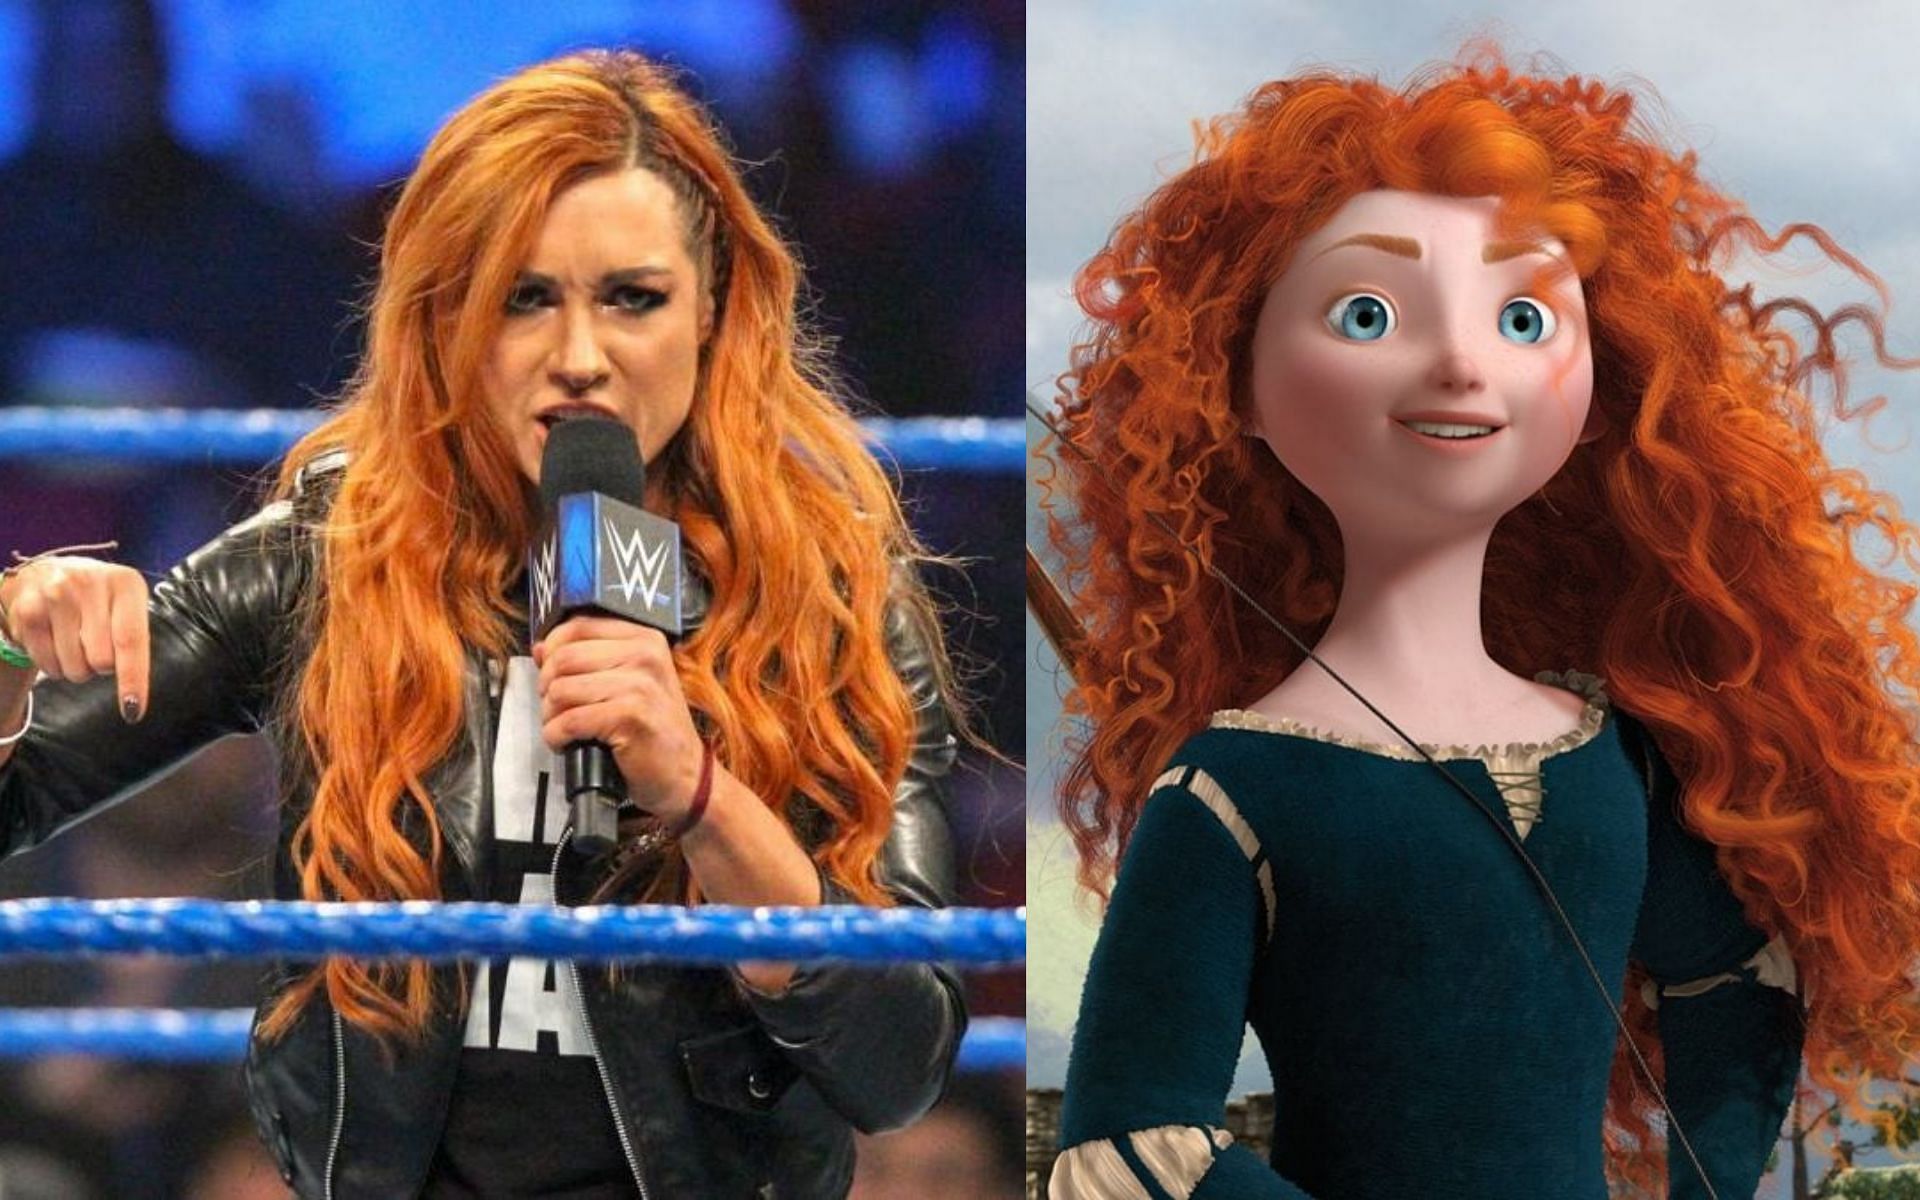 Becky Lynch from WWE and Merida have a lot in common.